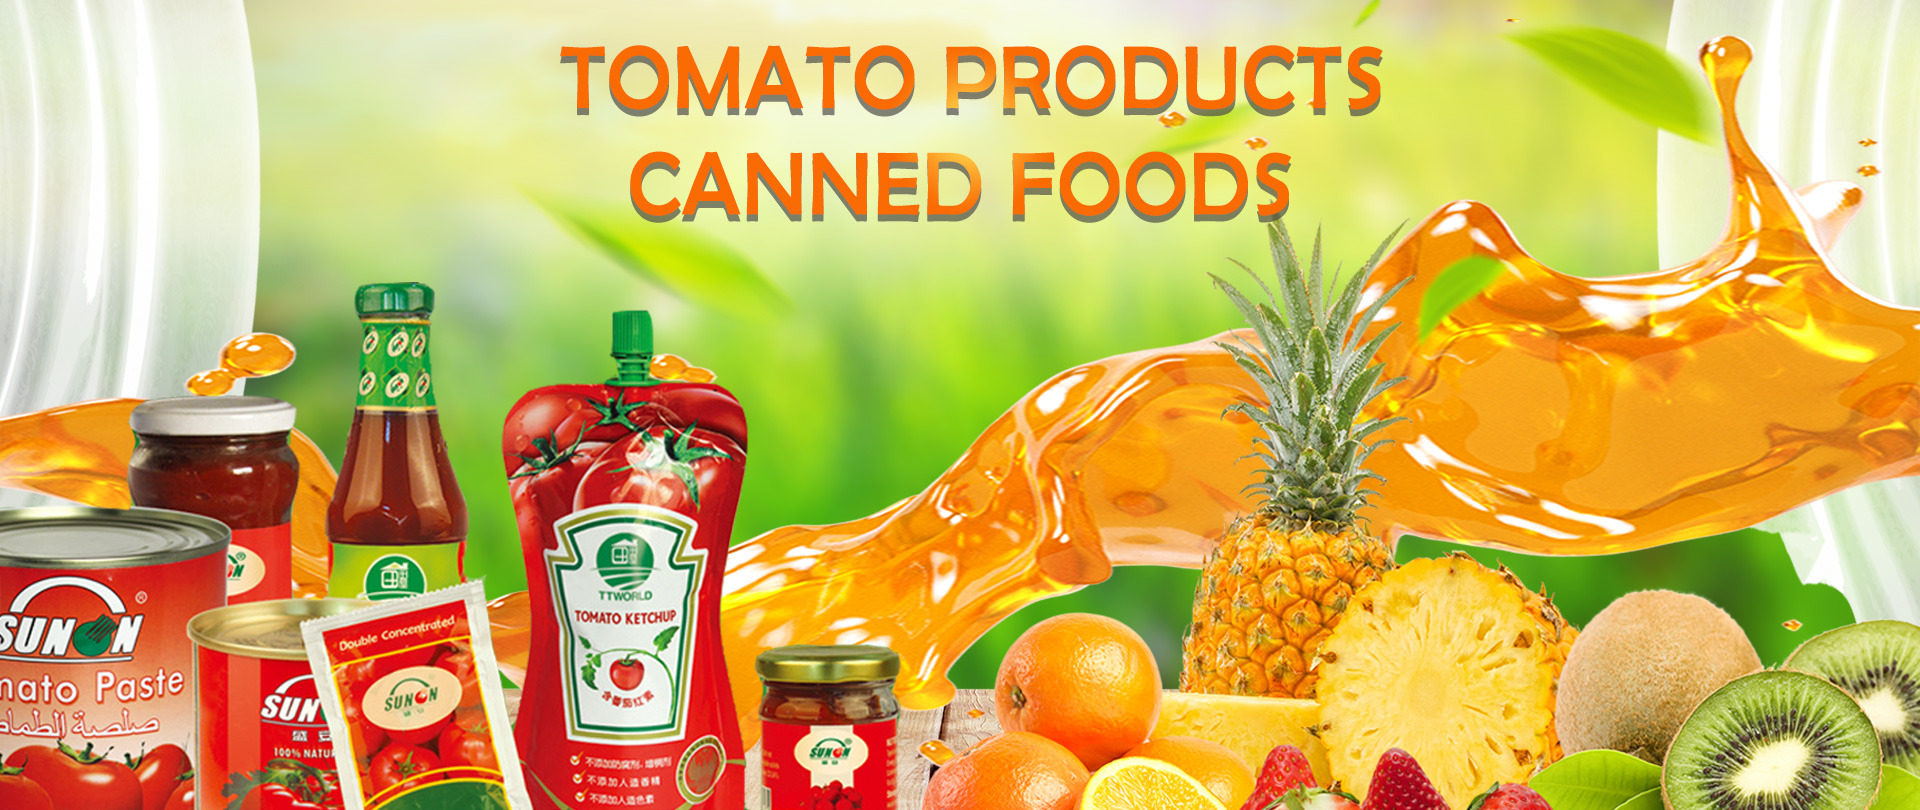 TOMATO PRODUCTS CANNED FOODS